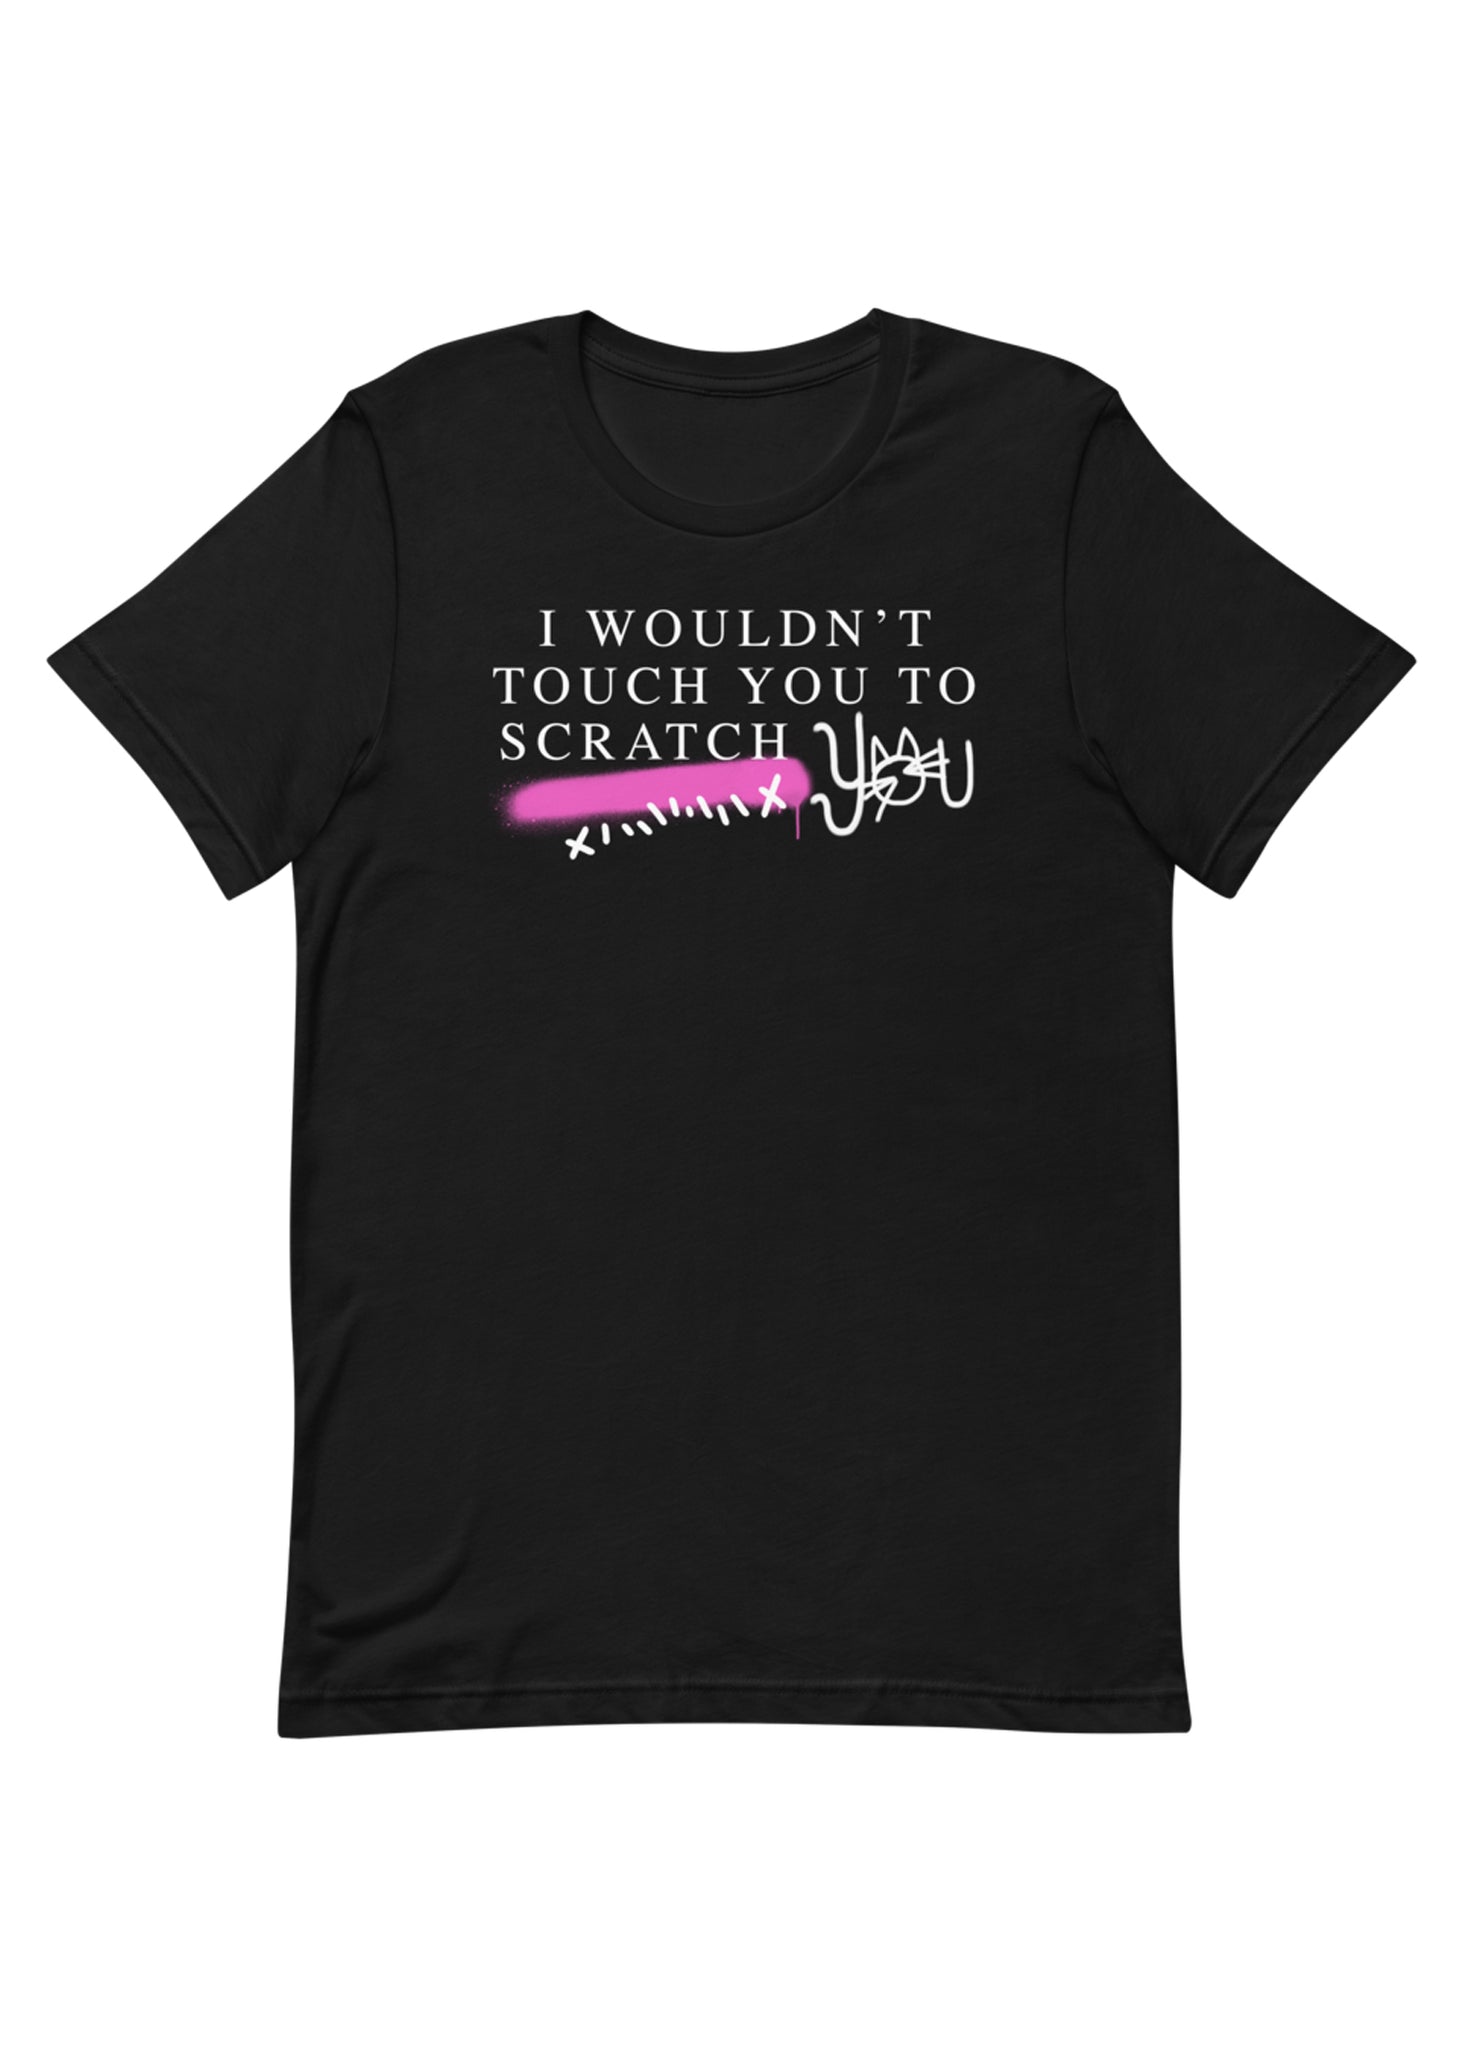 Scratch You Unisex Adult T-Shirt in Black